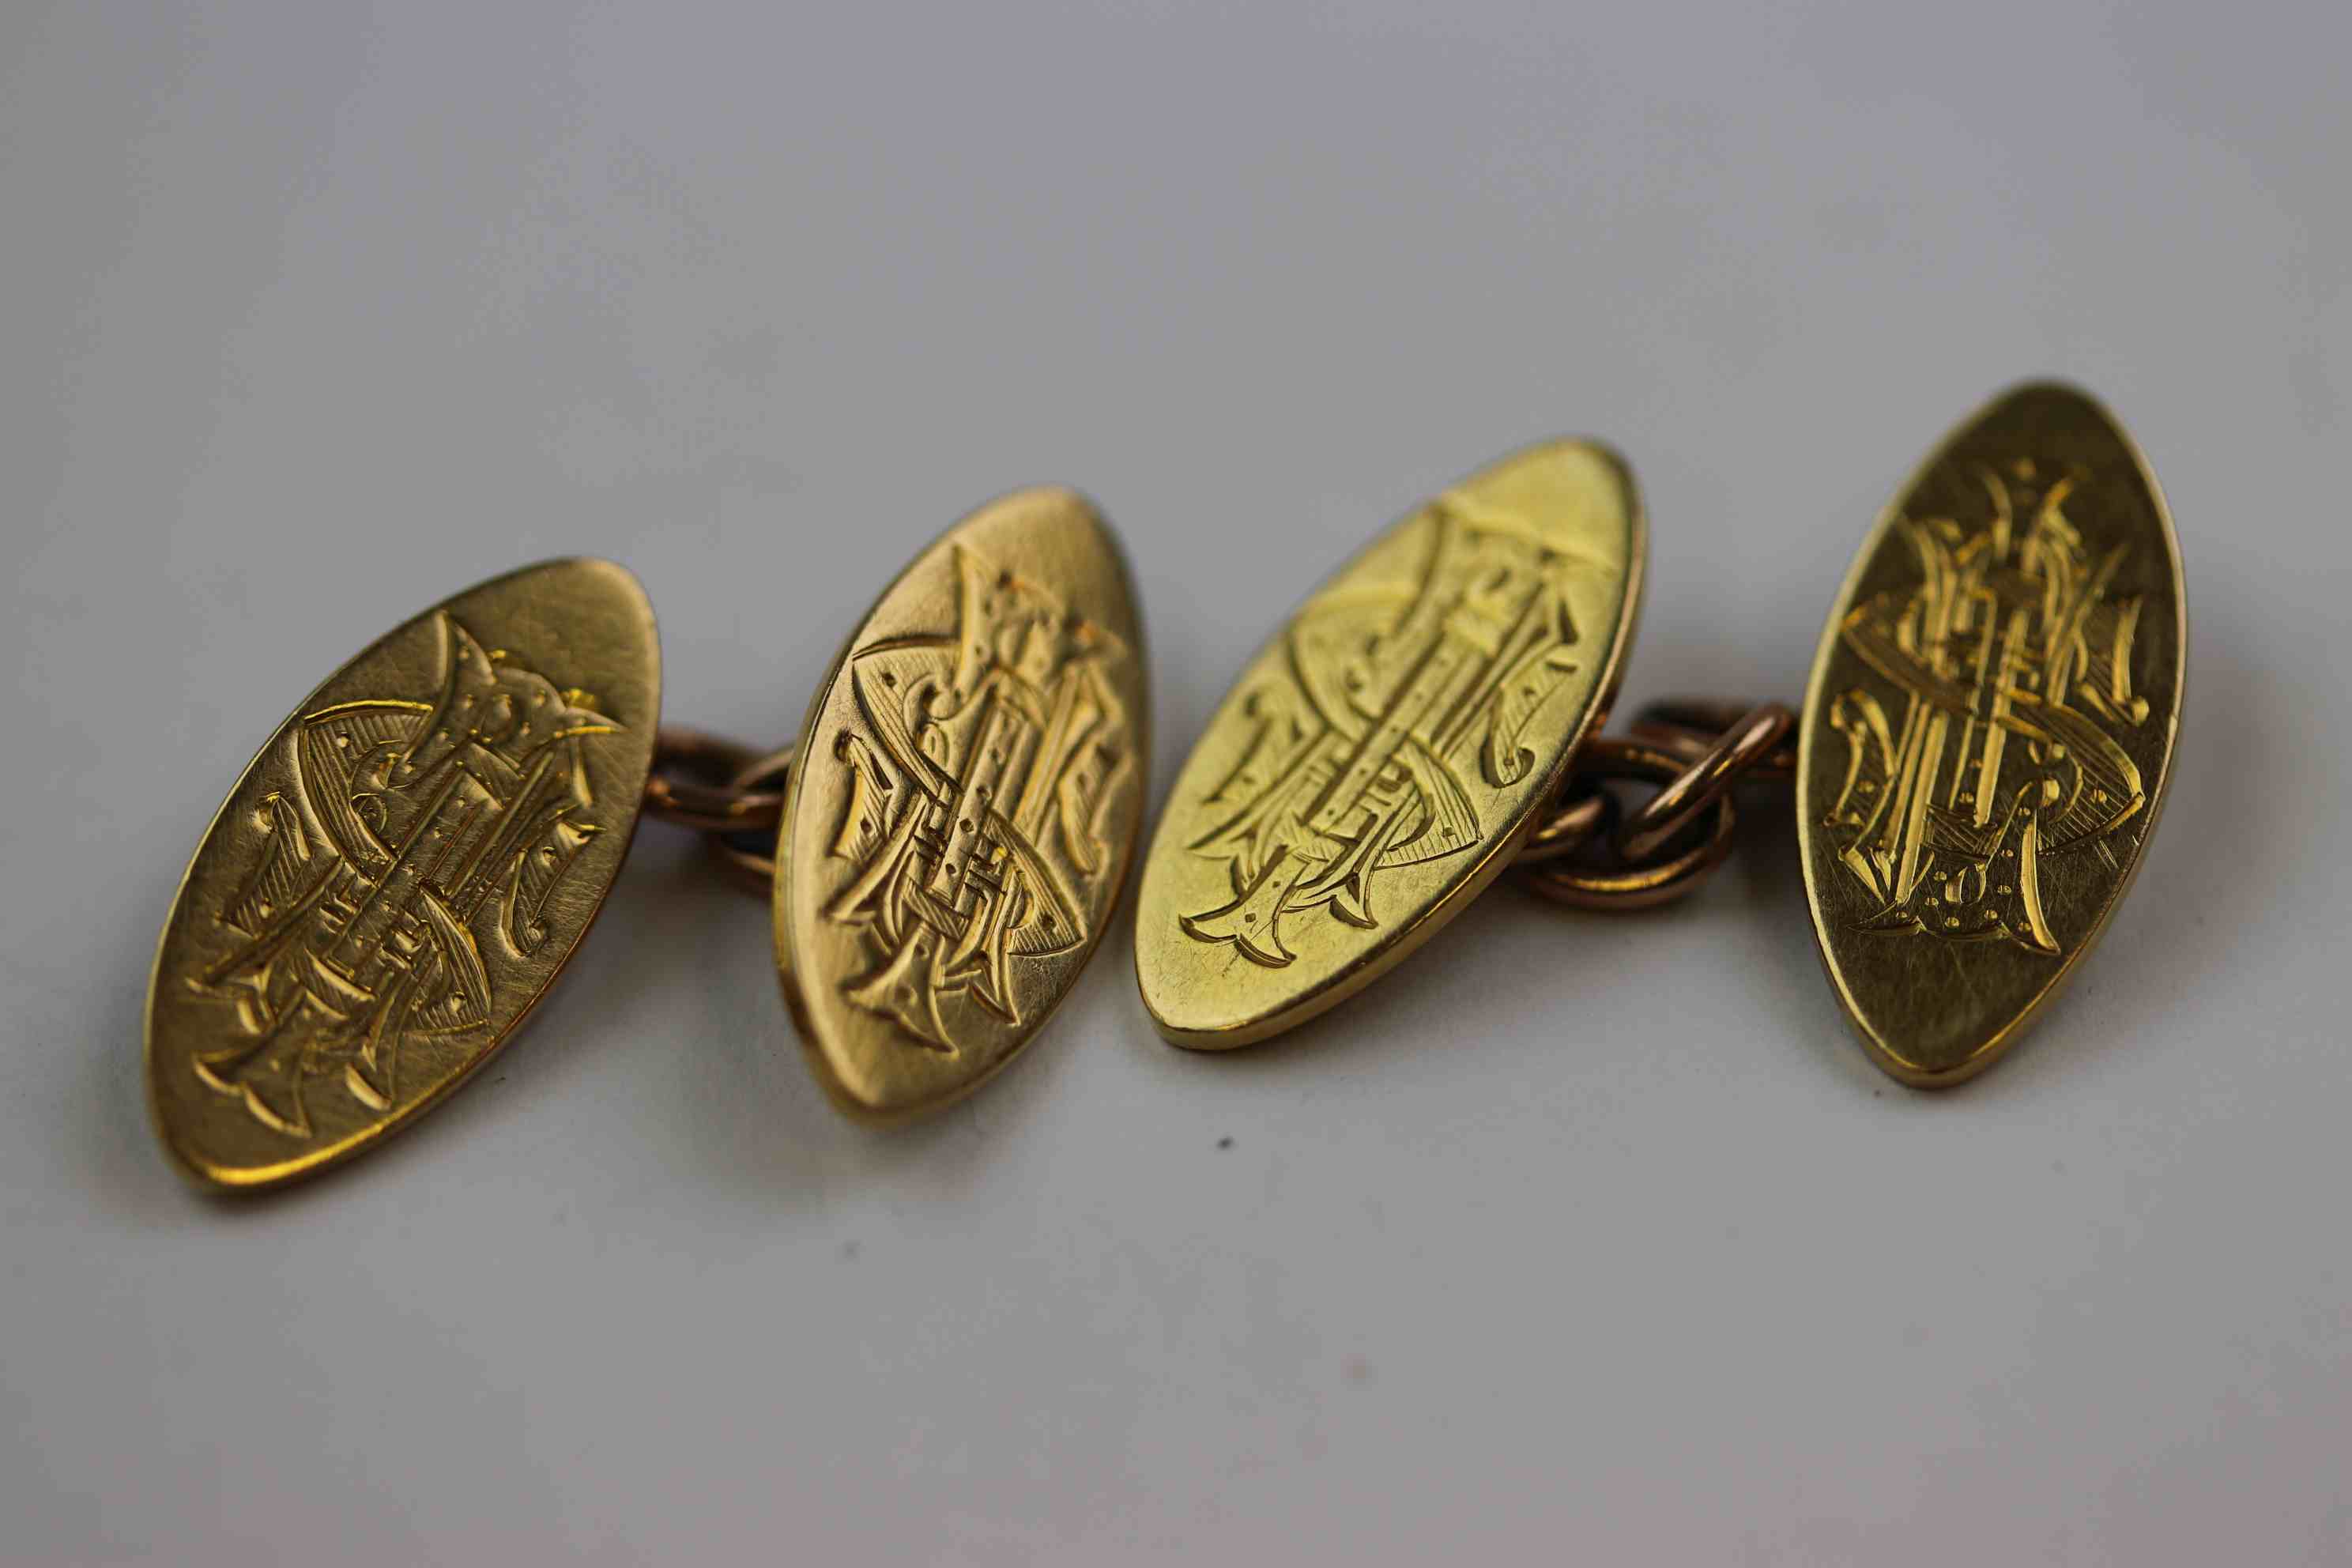 Pair of 18ct yellow gold chain link cufflinks, each navette shaped panel with engraved initials - Image 2 of 6